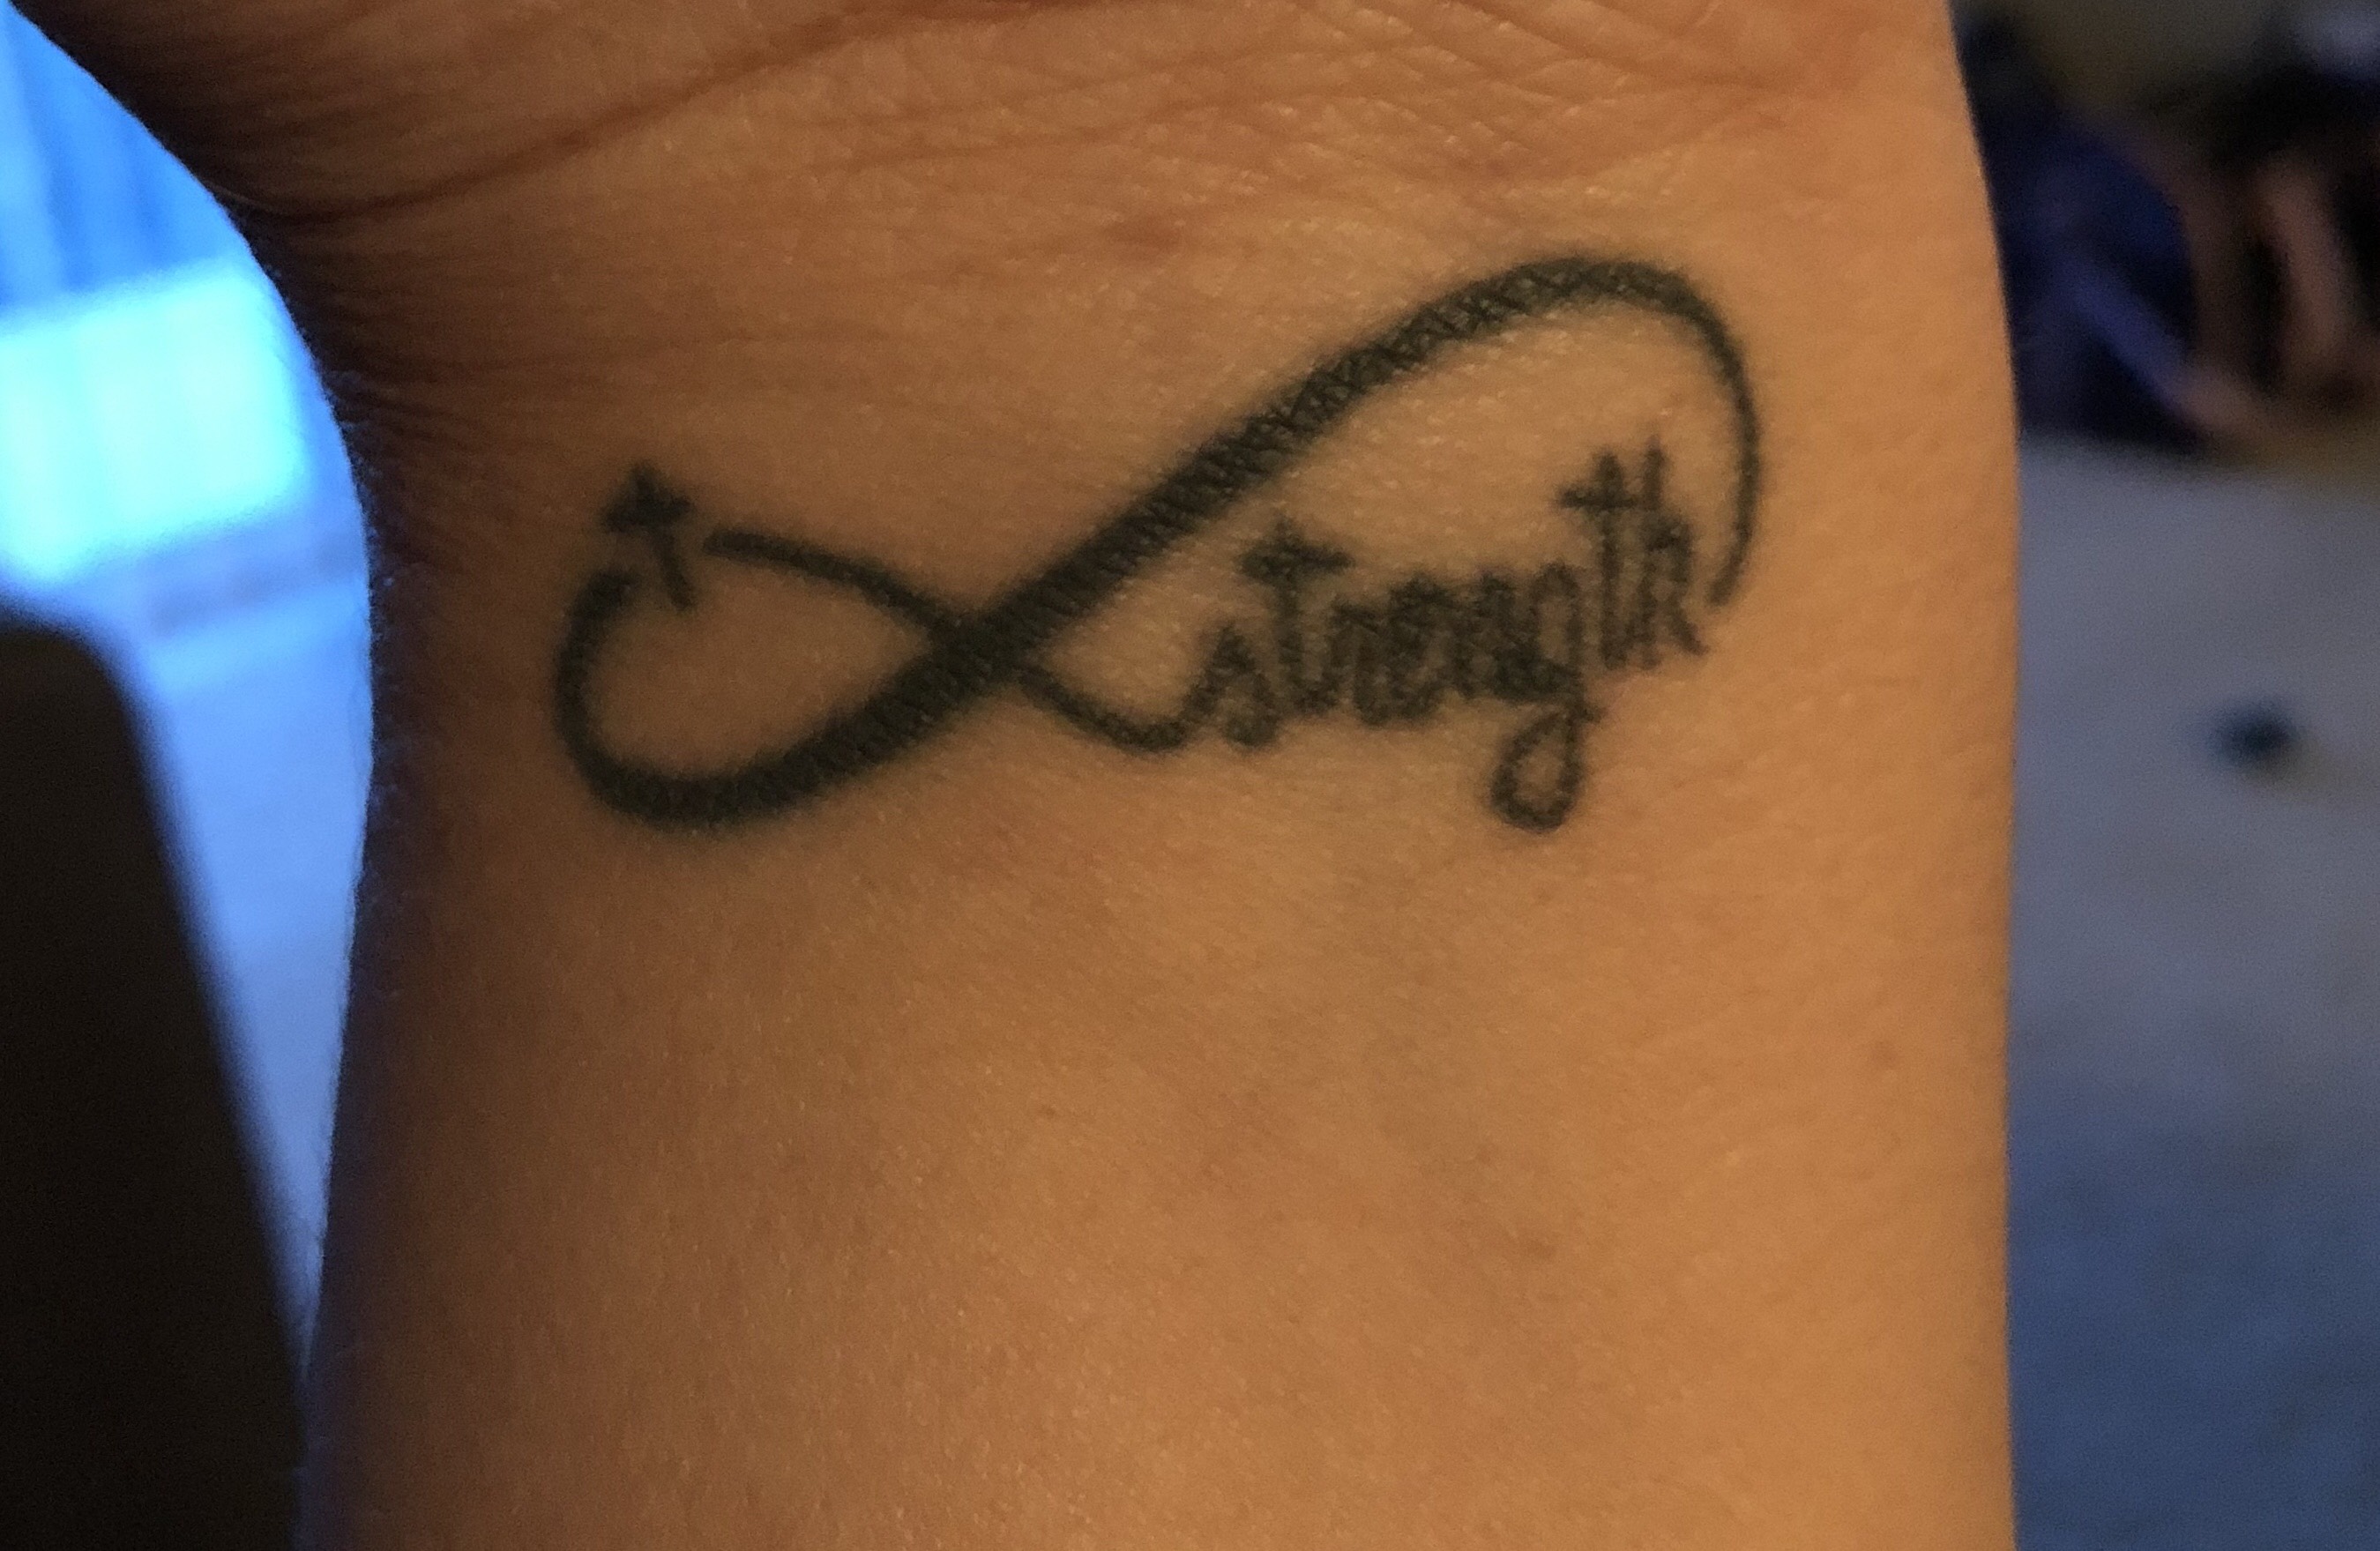 tattoo of an infinity sign with a cross and the word 'strength' in it